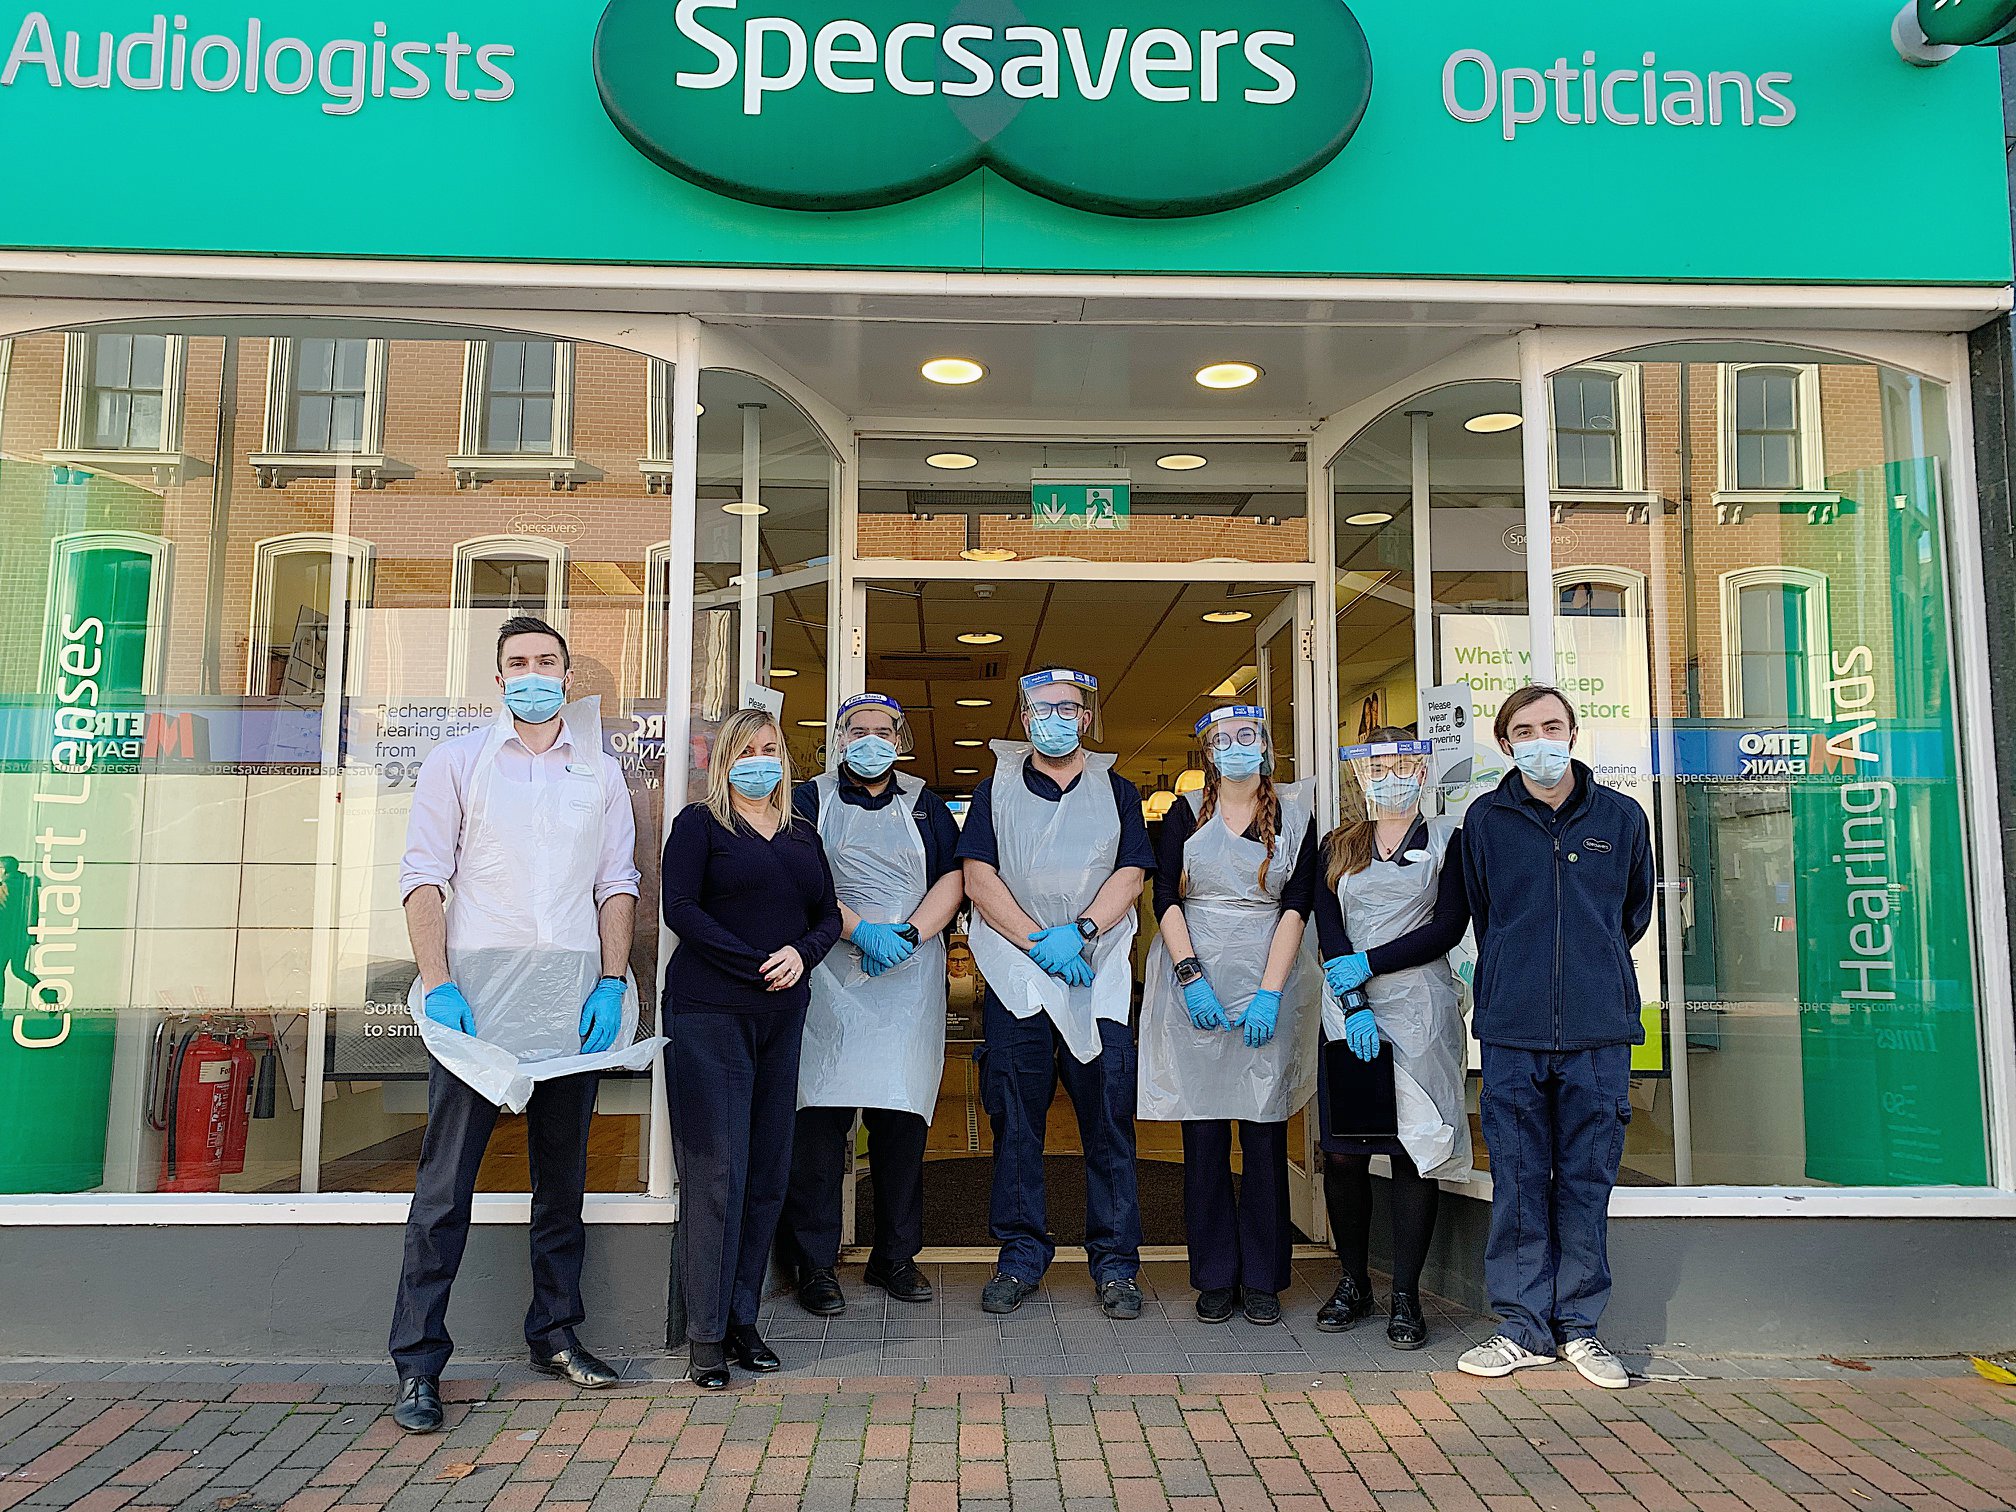 Specsavers join the TN card - image